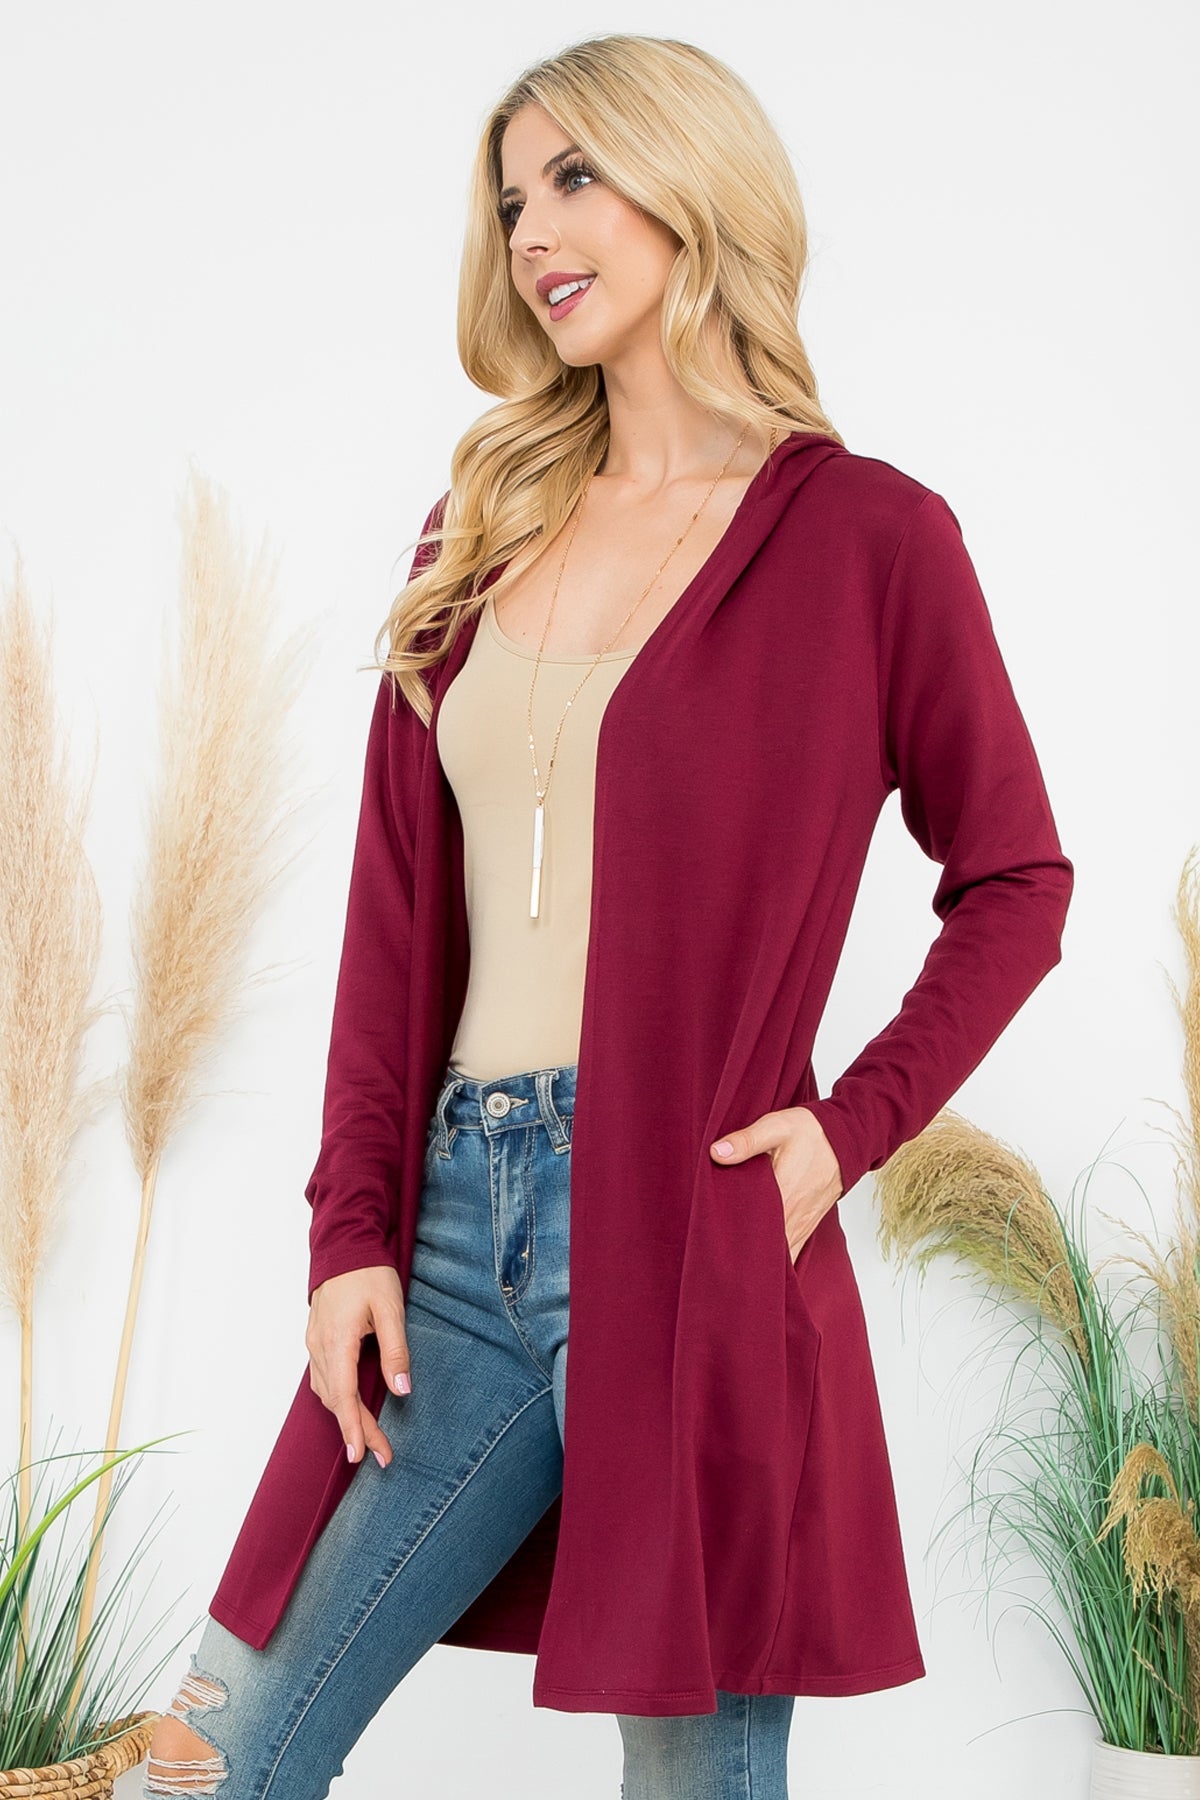 PLUS SIZE LONG SLEEVE OPEN FRONT FRENCH TERRY HOODIE CARDIGAN 3-2-1